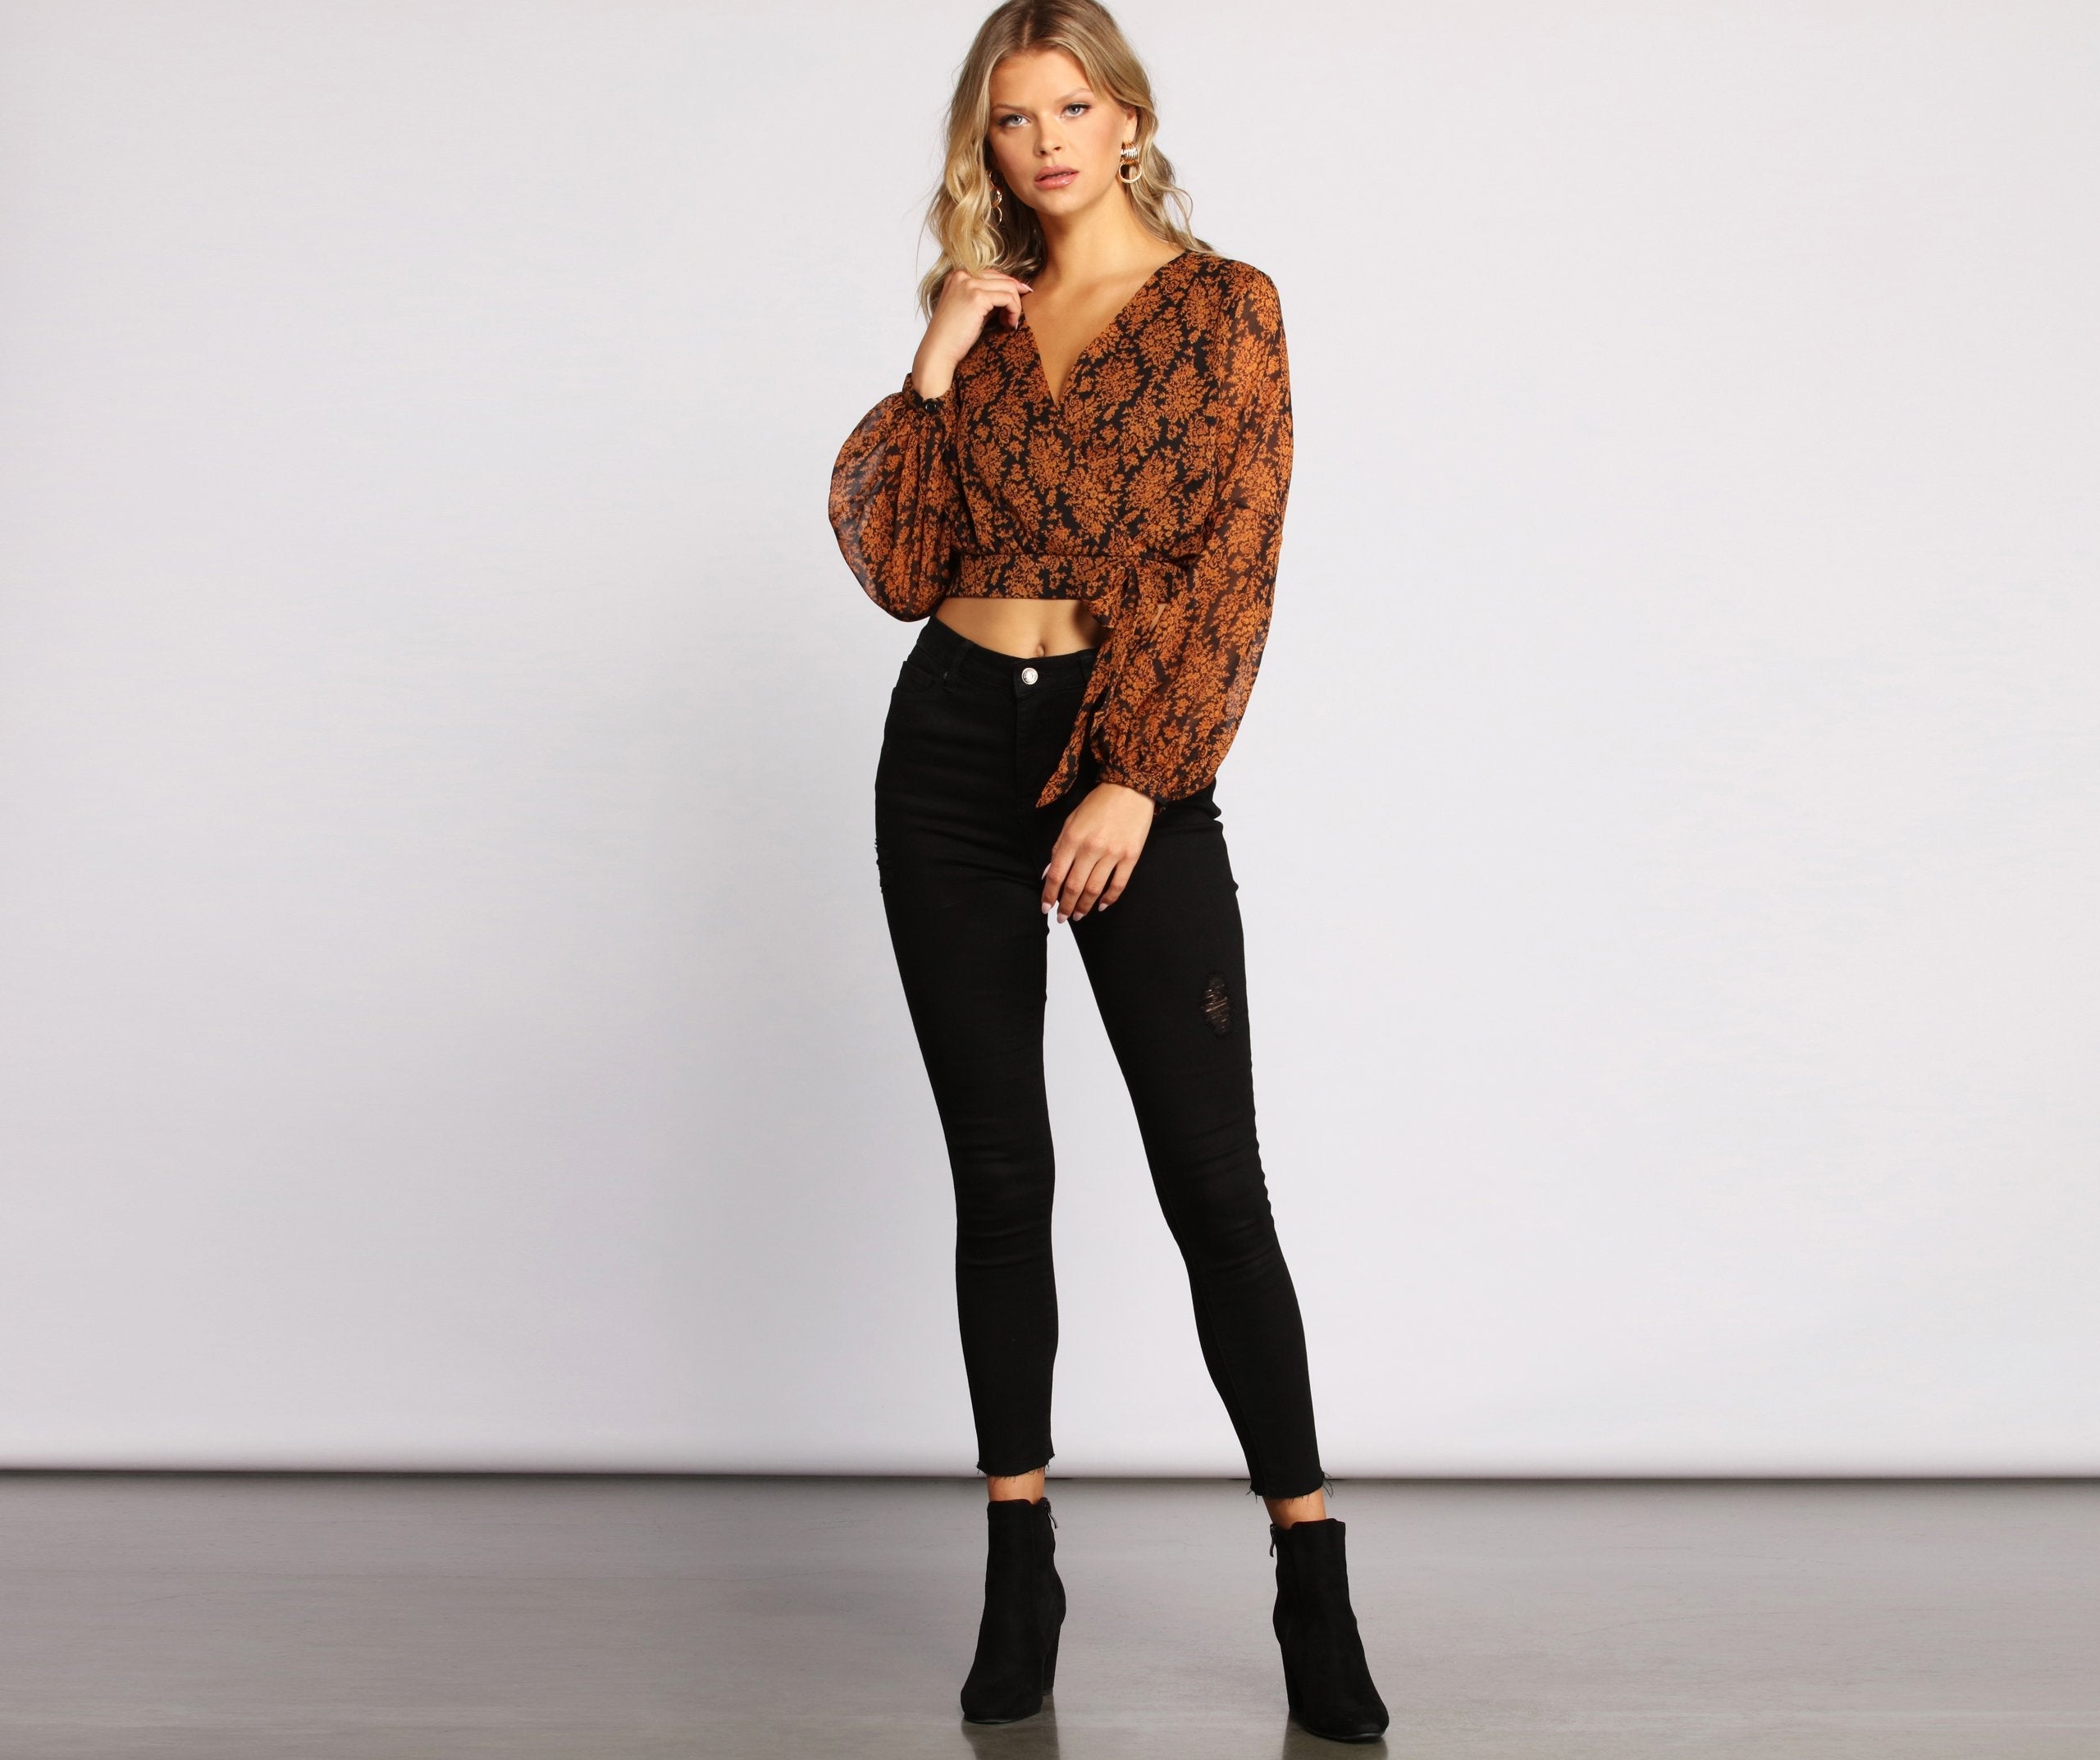 Fall Floral Wrap Front Crop Top